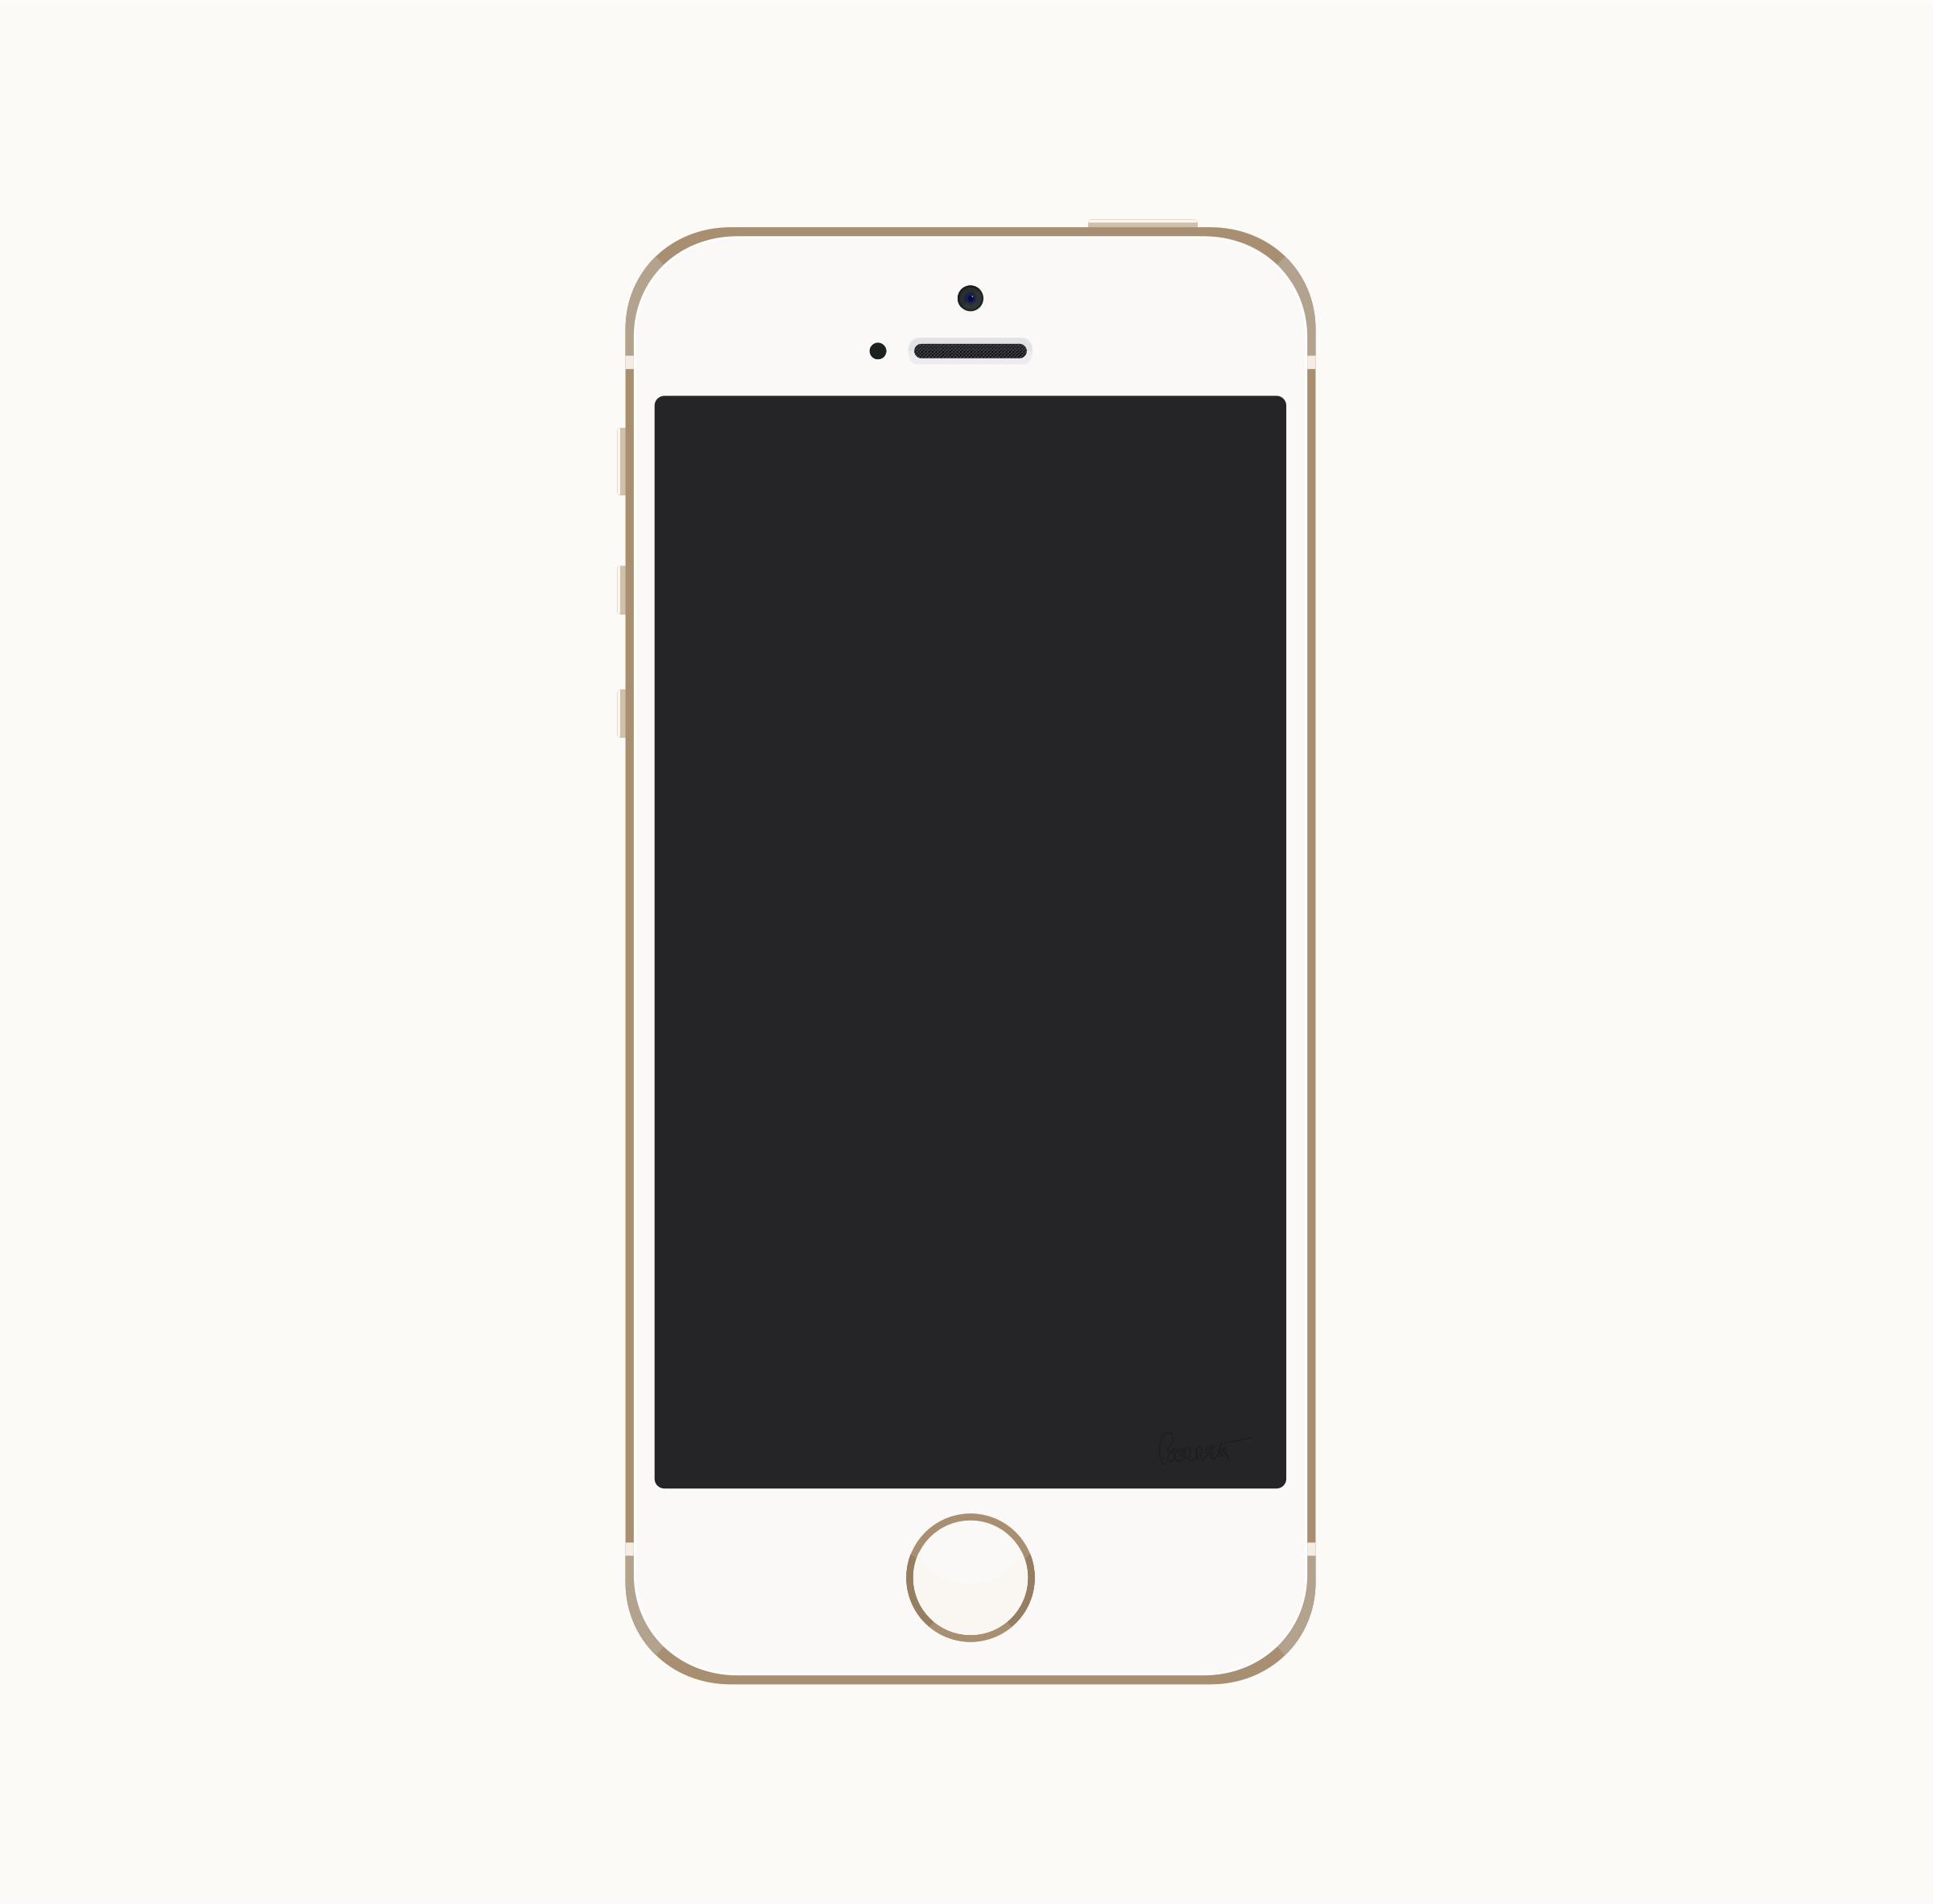 Iphone outline clipart